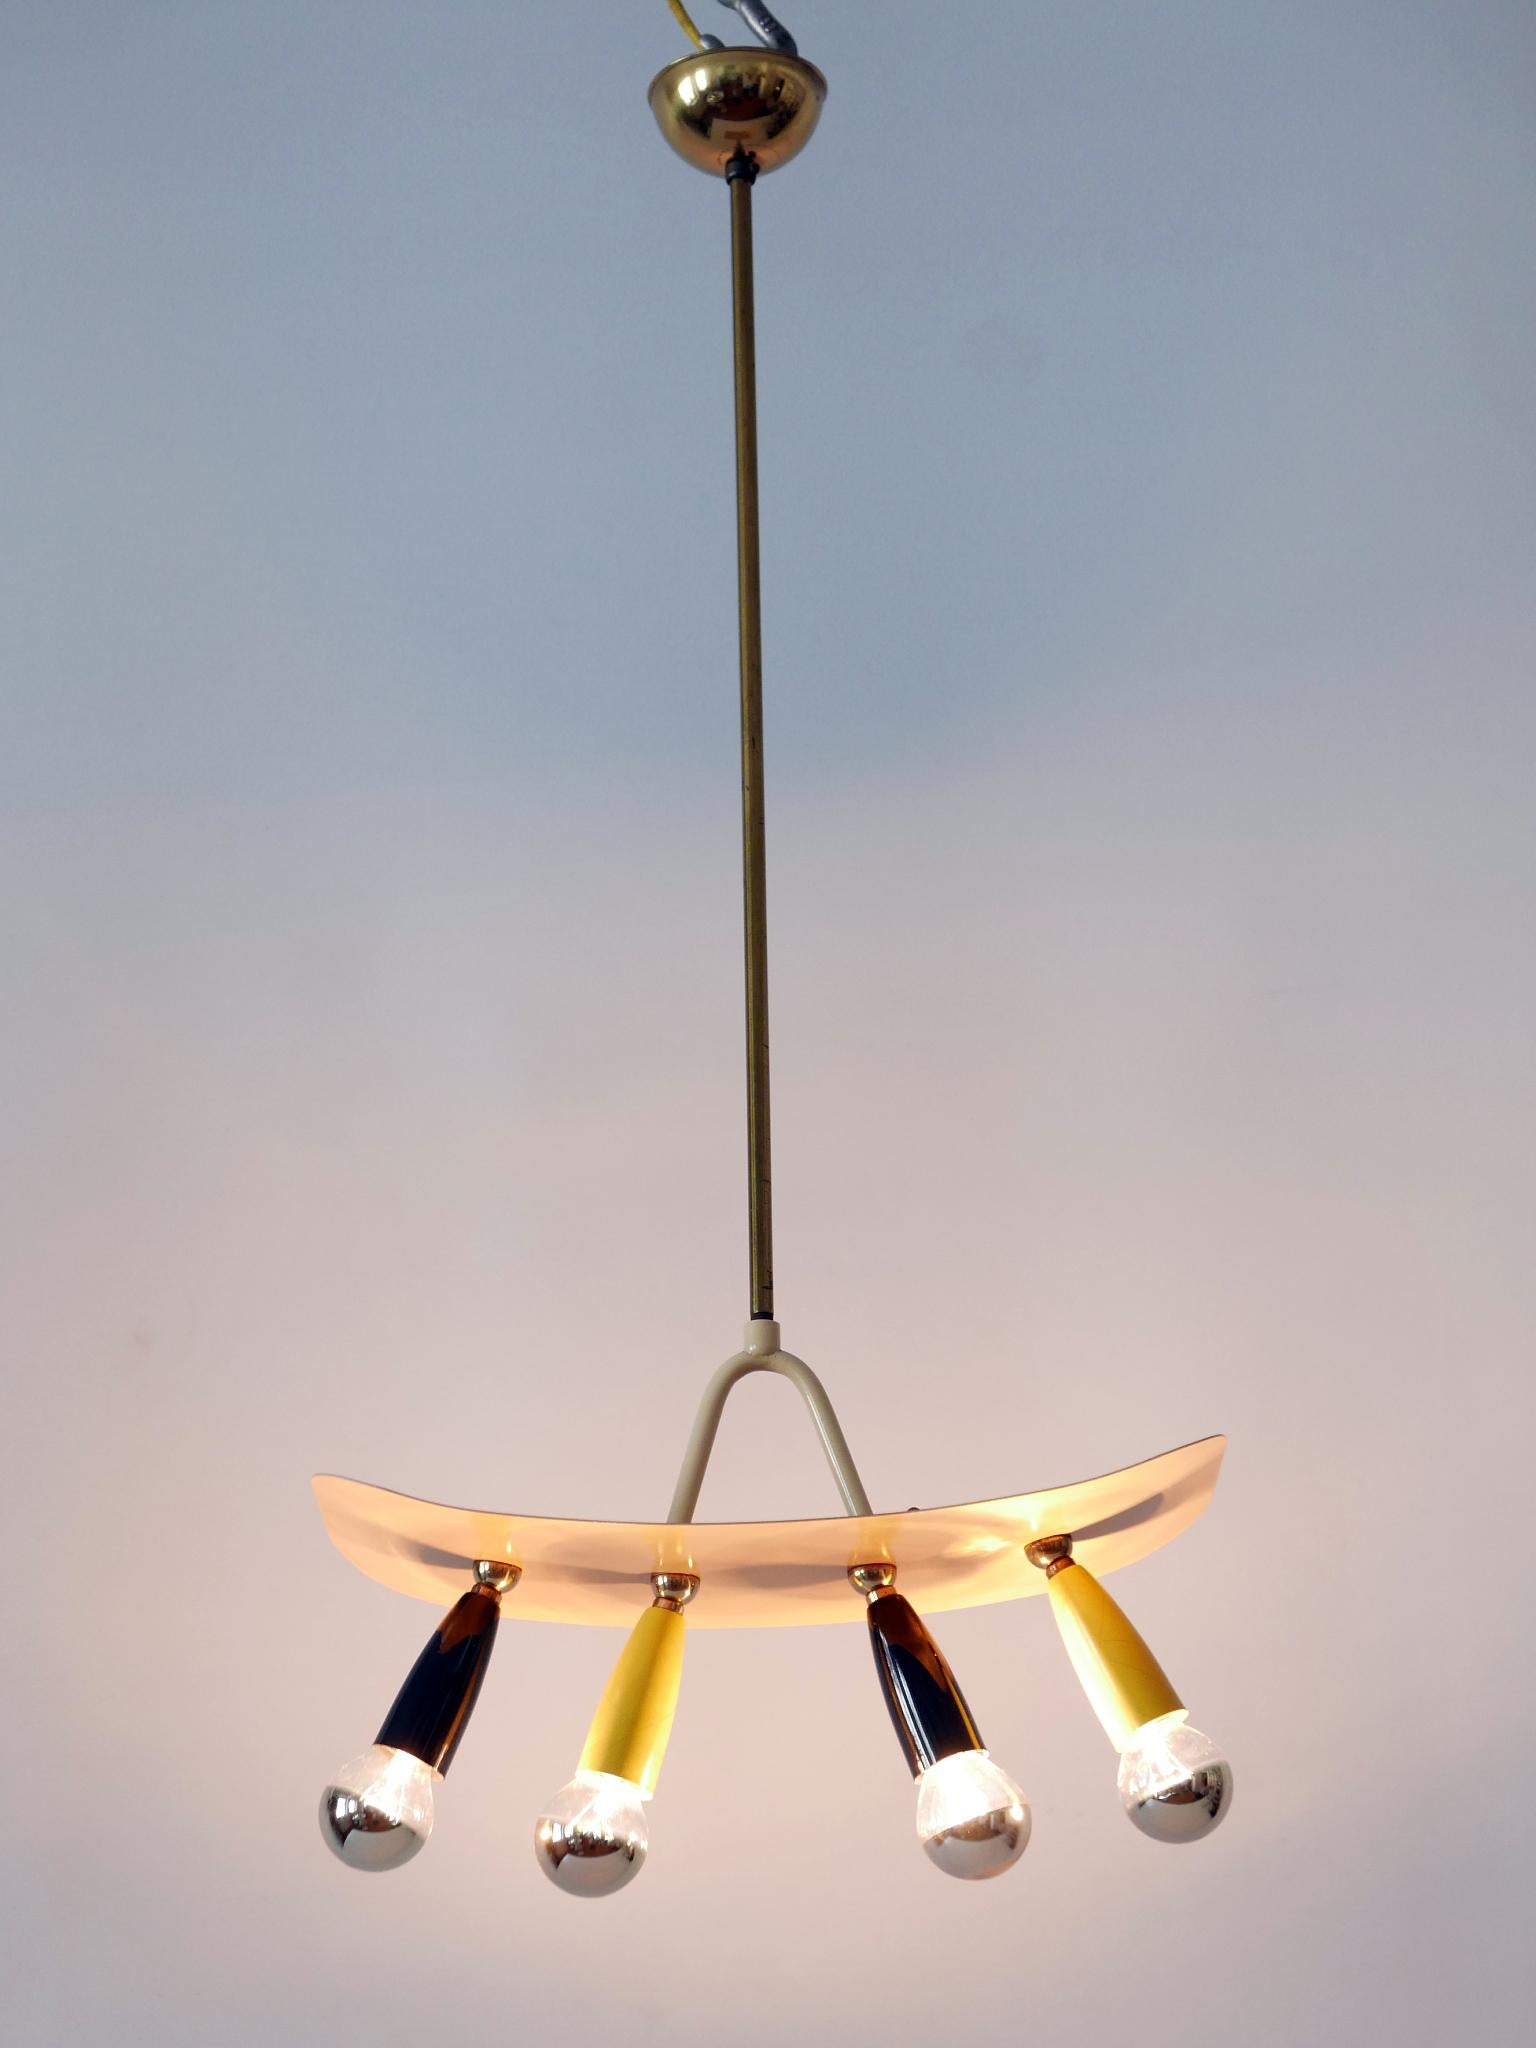 Amazing Mid Century Modern four-flamed sputnik pendant lamp. Designed & manufactured in Germany, 1950s.

Executed in brass & metal, the pendant lamp is executed with 4 x E14 / E12 Edison screw fit bulb sockets, wired and in working condition. It